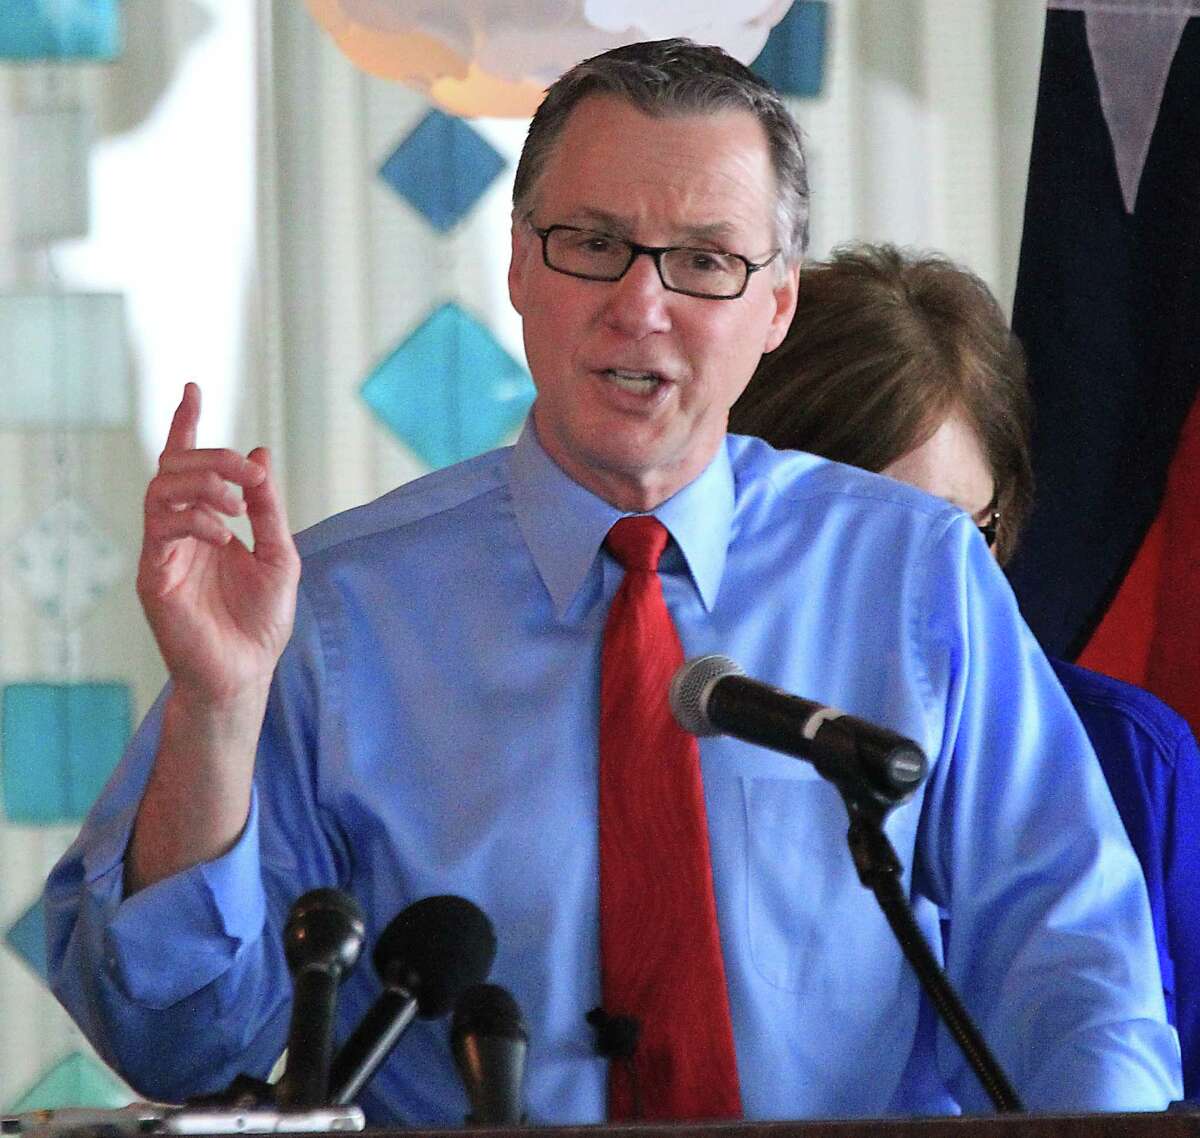 Houston City Councilman Stephen Costello speaks during a press conference formally announcing his mayoral campaign at the Hilton Americas Houston Hotel Monday, March 9, 2015, in Houston.